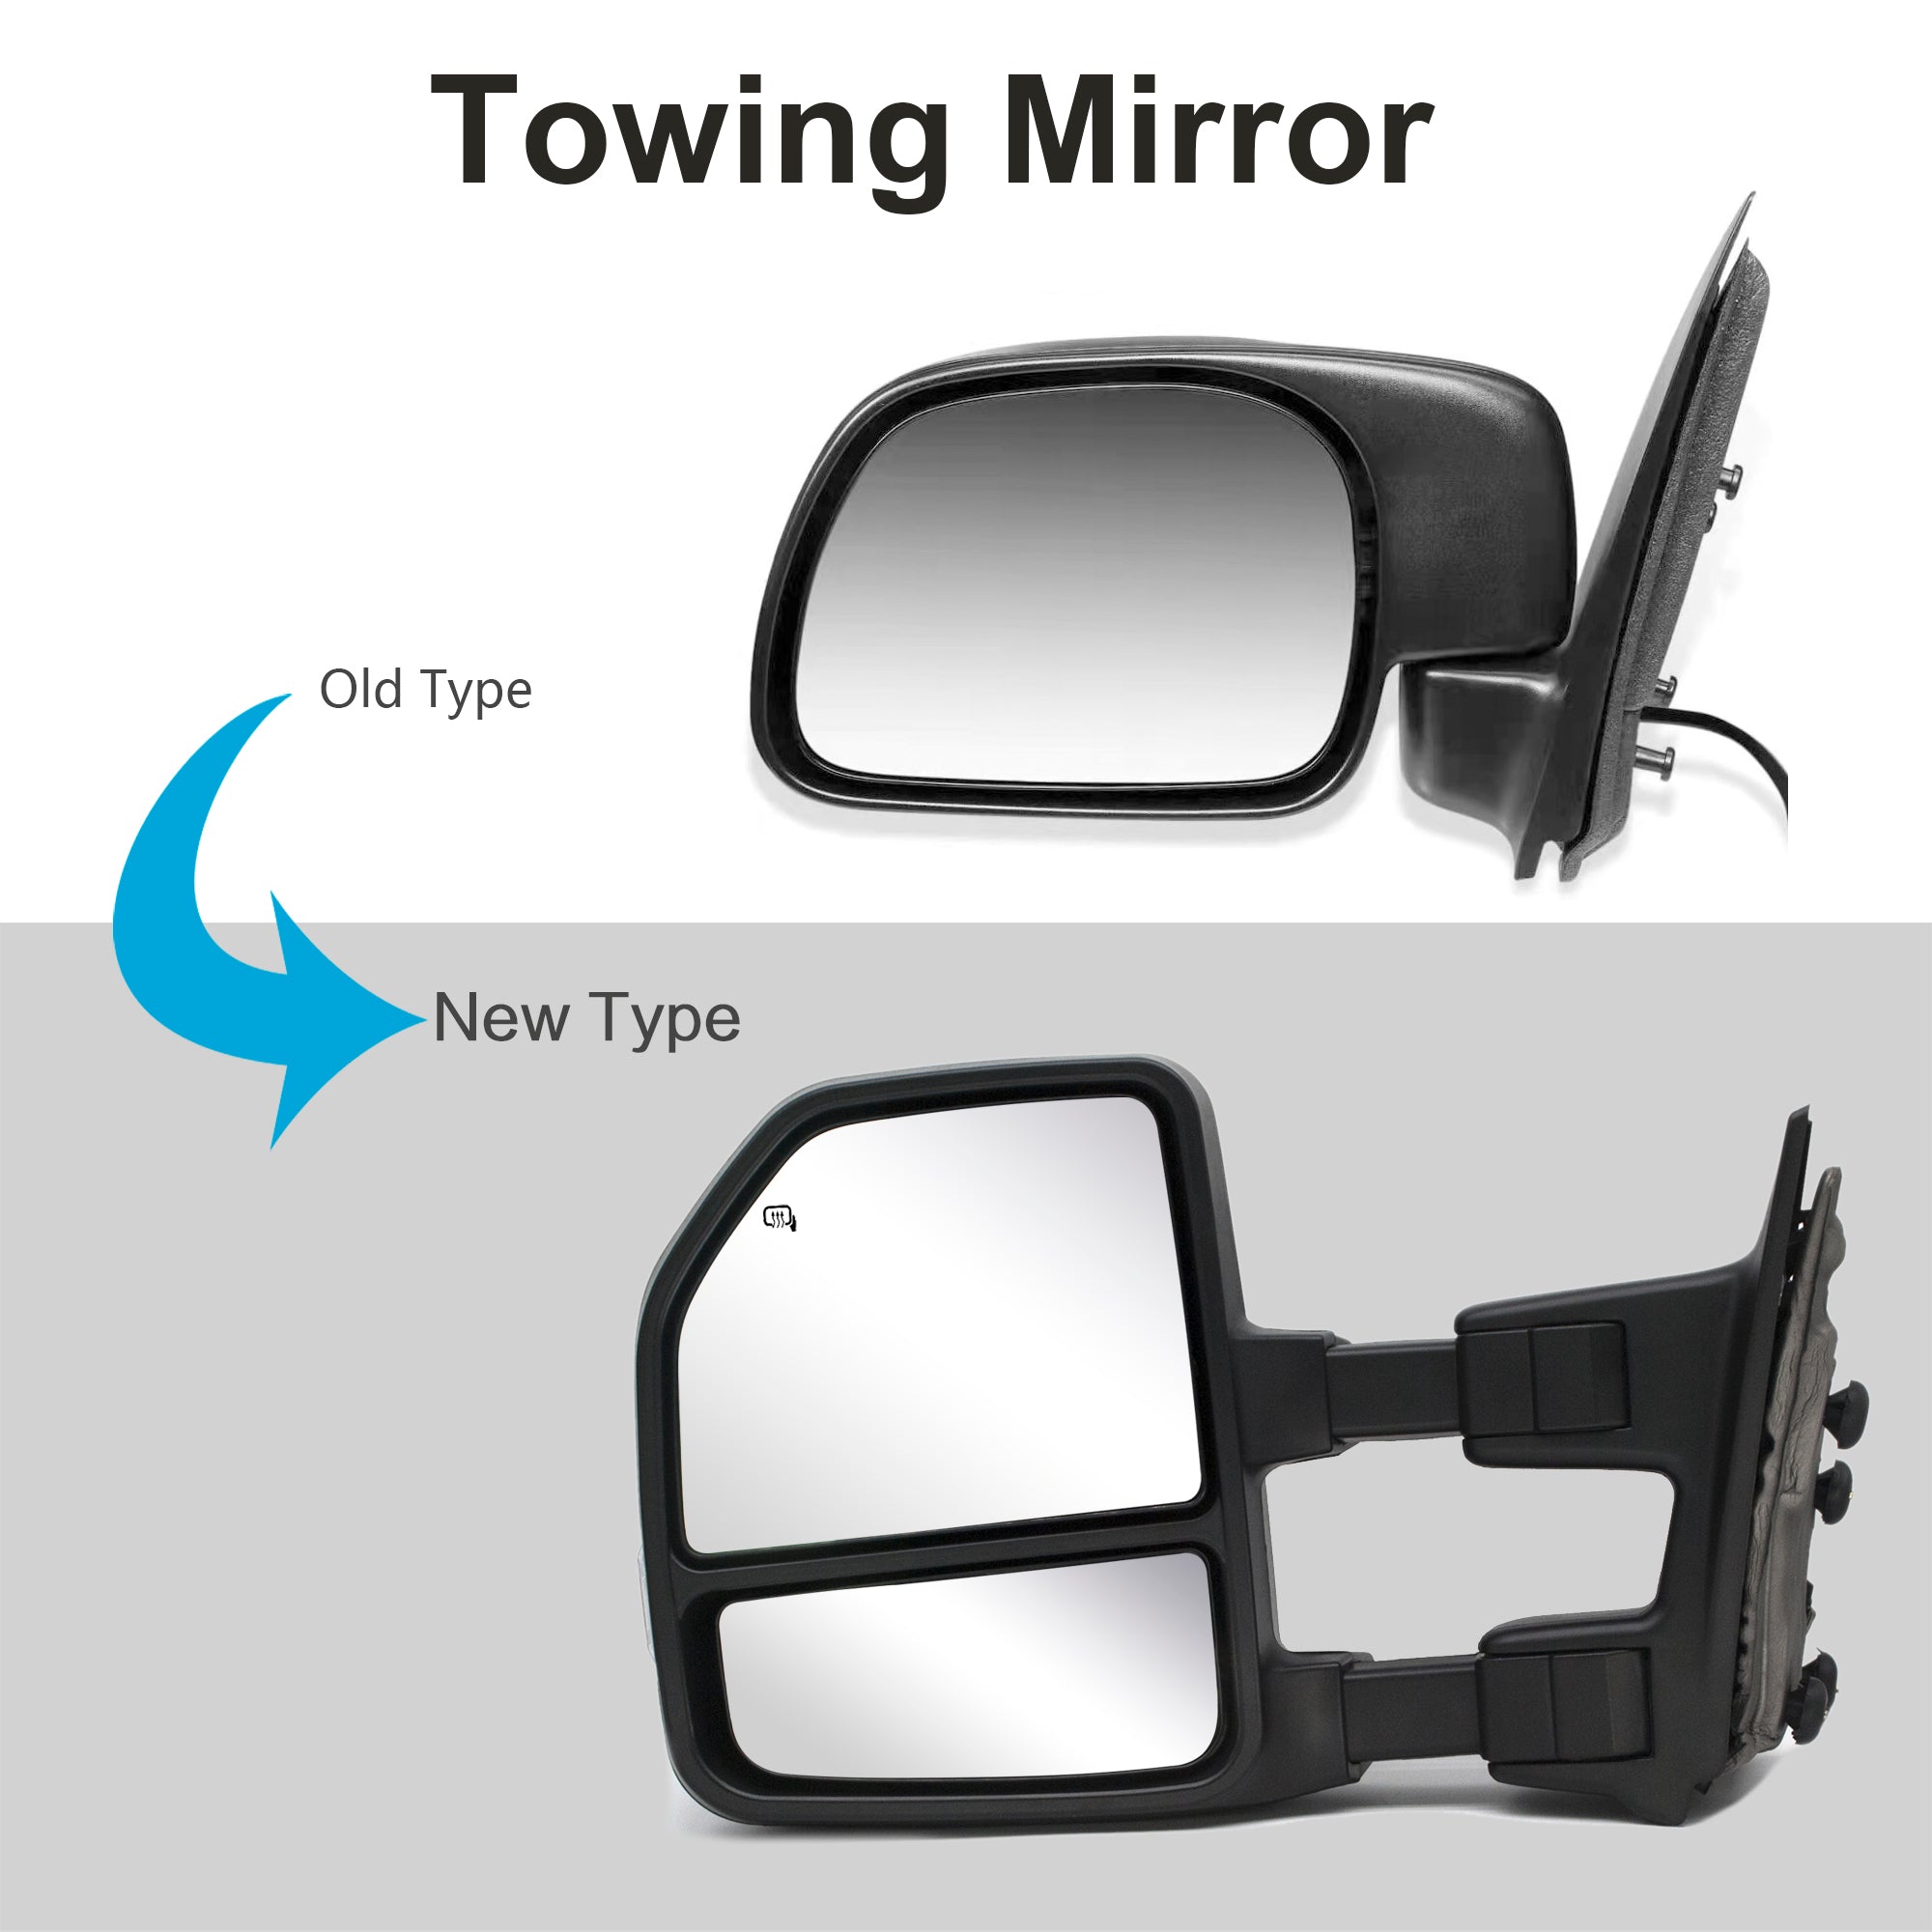 Towing Mirrors for 1999-2016 Ford F250 F350 F450 F550 Super Duty Manual Adjustment Glass Manual Extendable, Chrome Cap 18C